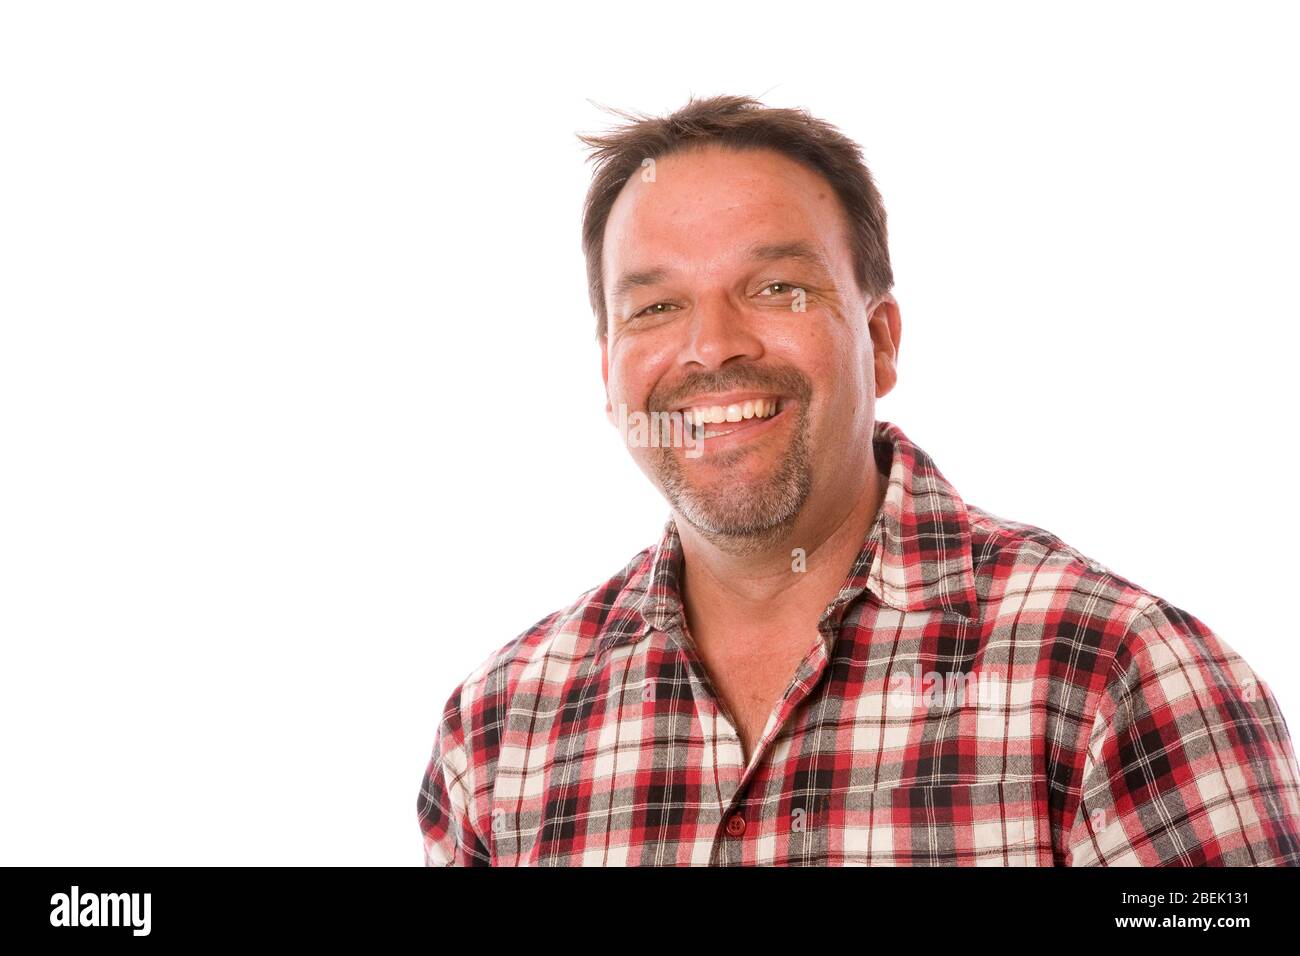 A portrait of a normal middle aged guy on white. Stock Photo